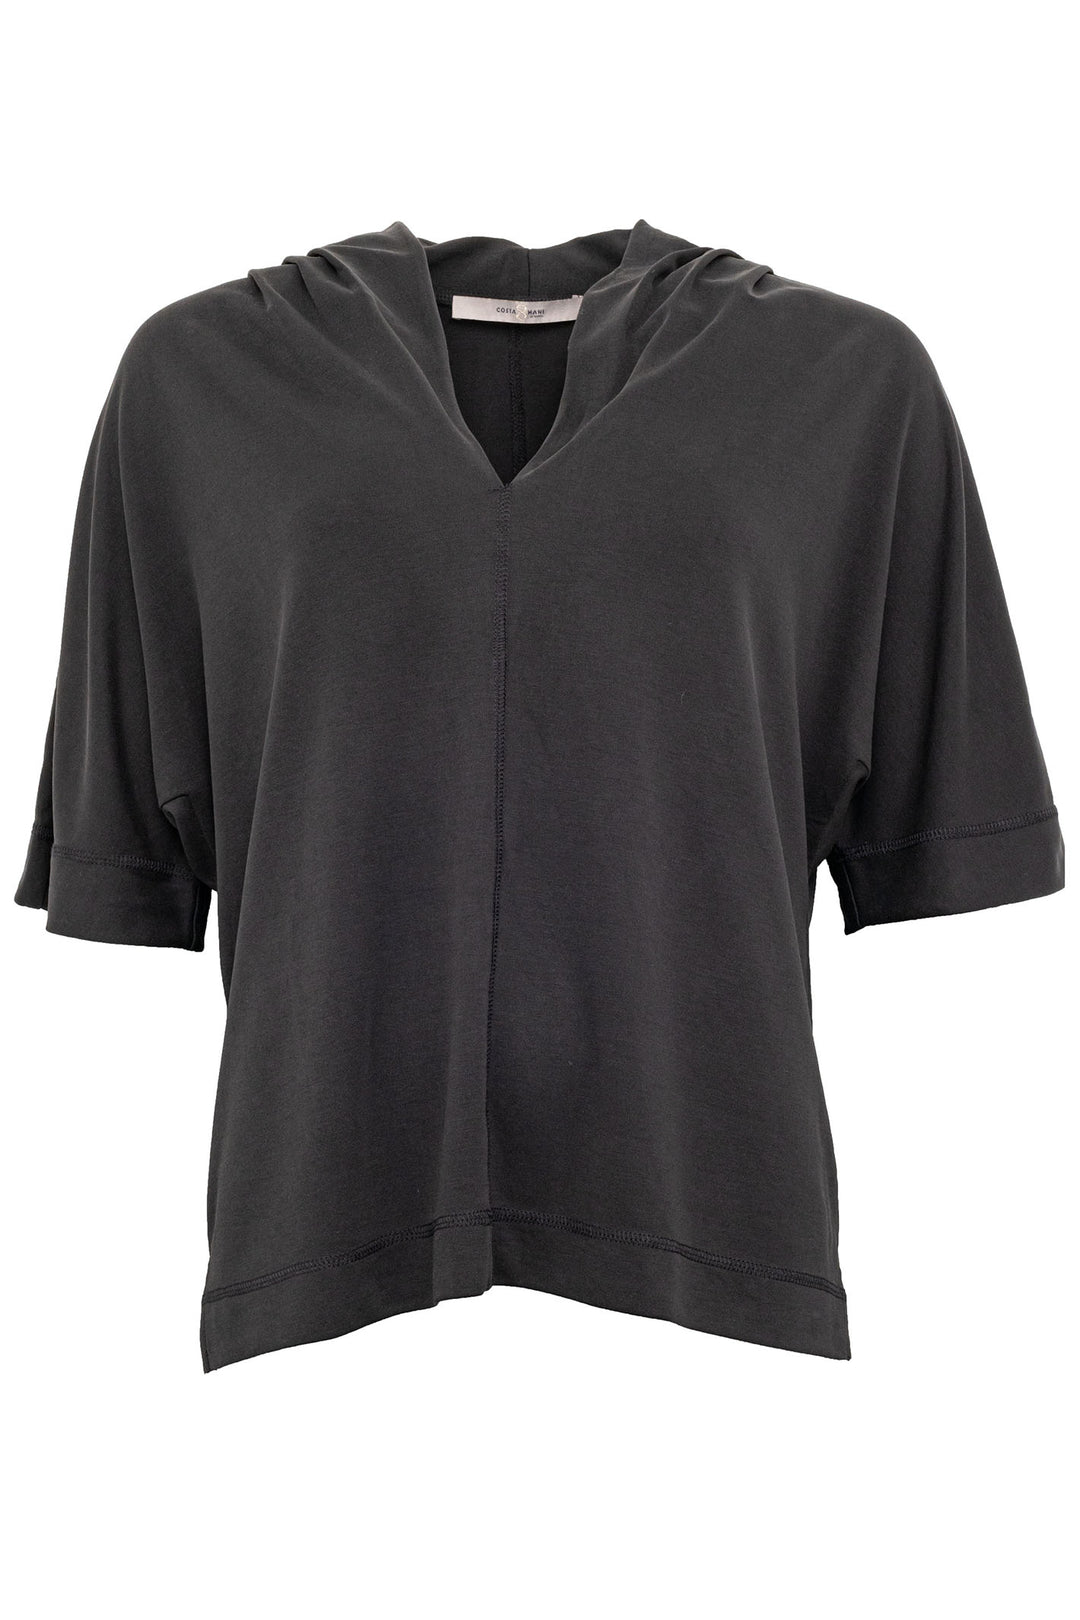 Costa Mani 2401150 Black Claccy V-Neck Top - Experience Boutique